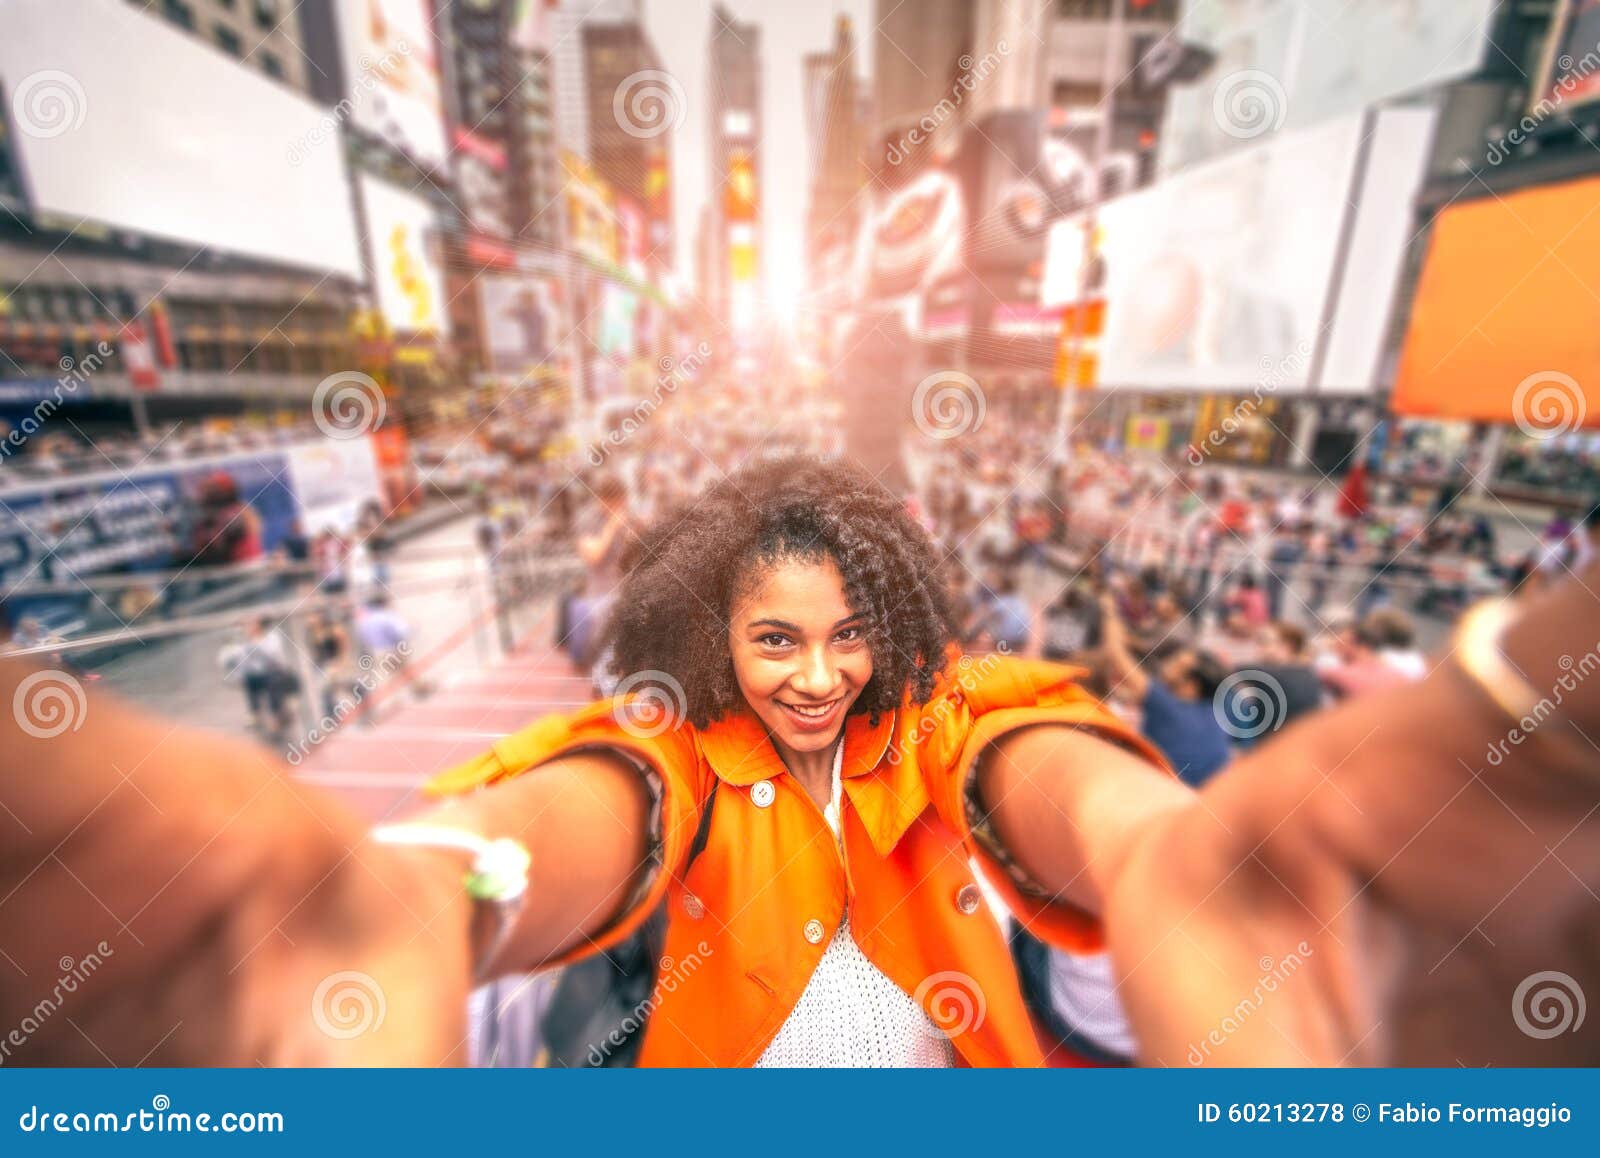 selfie at times square, new york